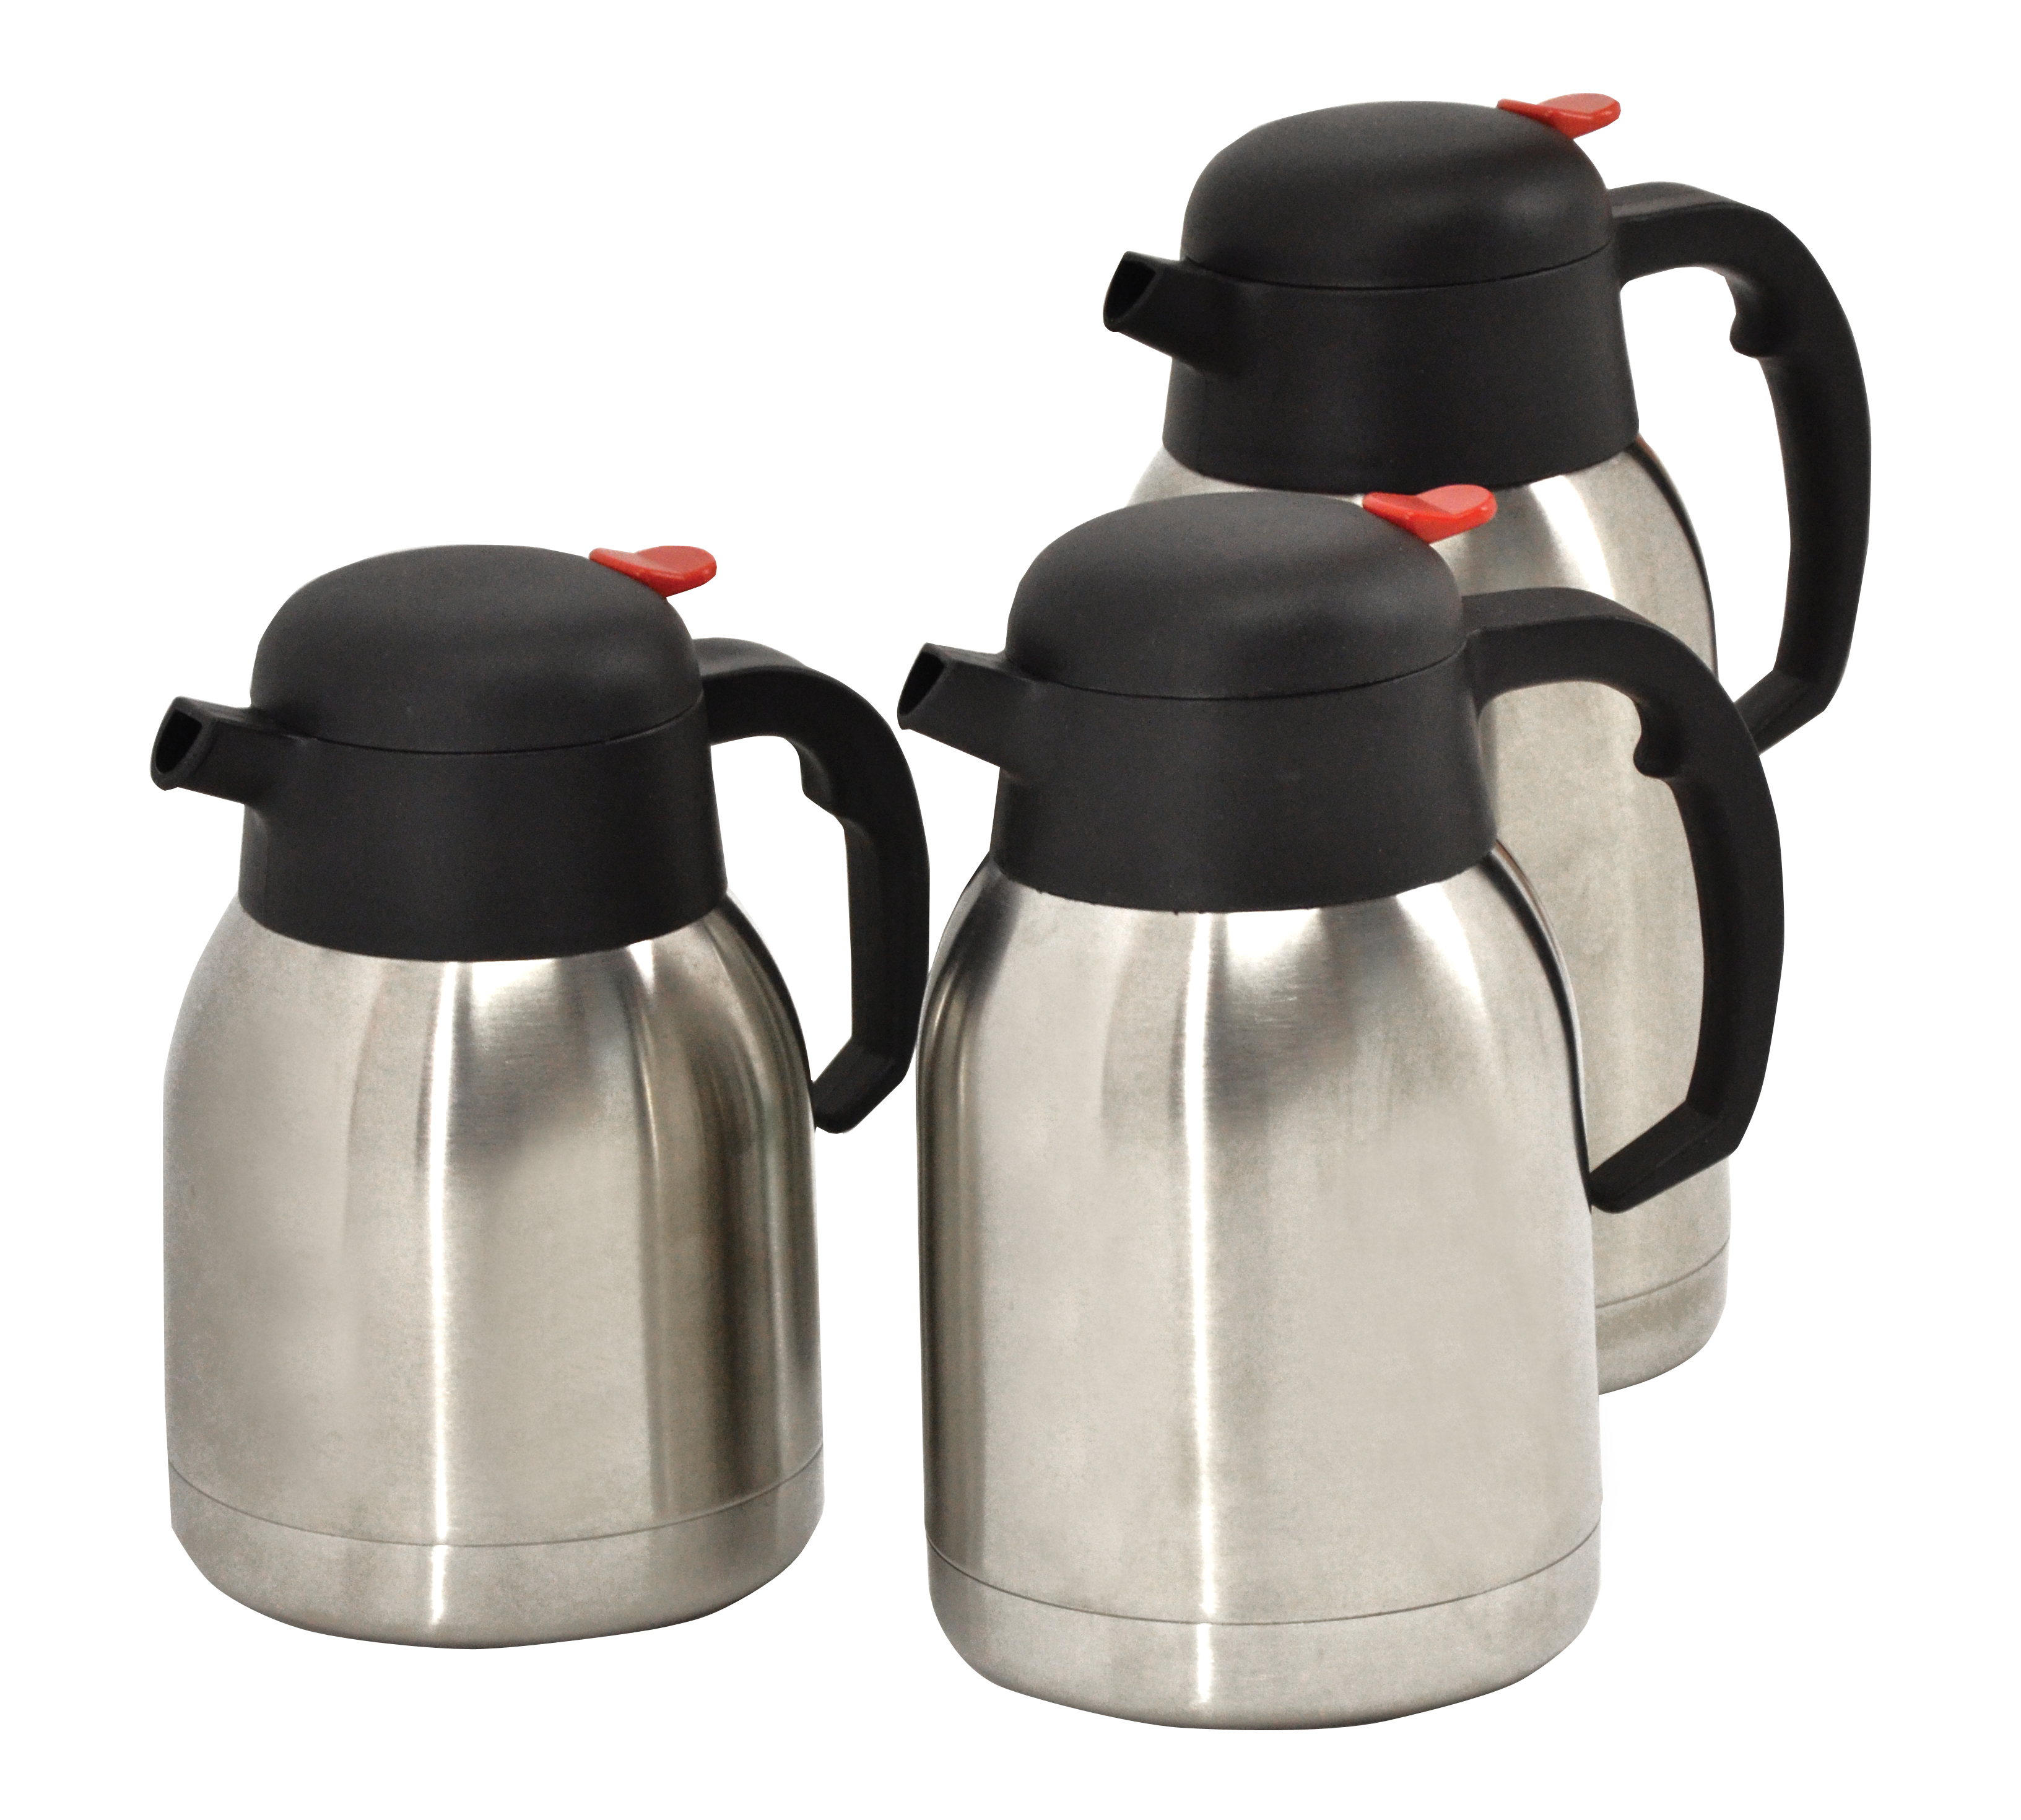 Stainless Steel Coffee Maker with 2 Liter Thermal Carafe – Omcan